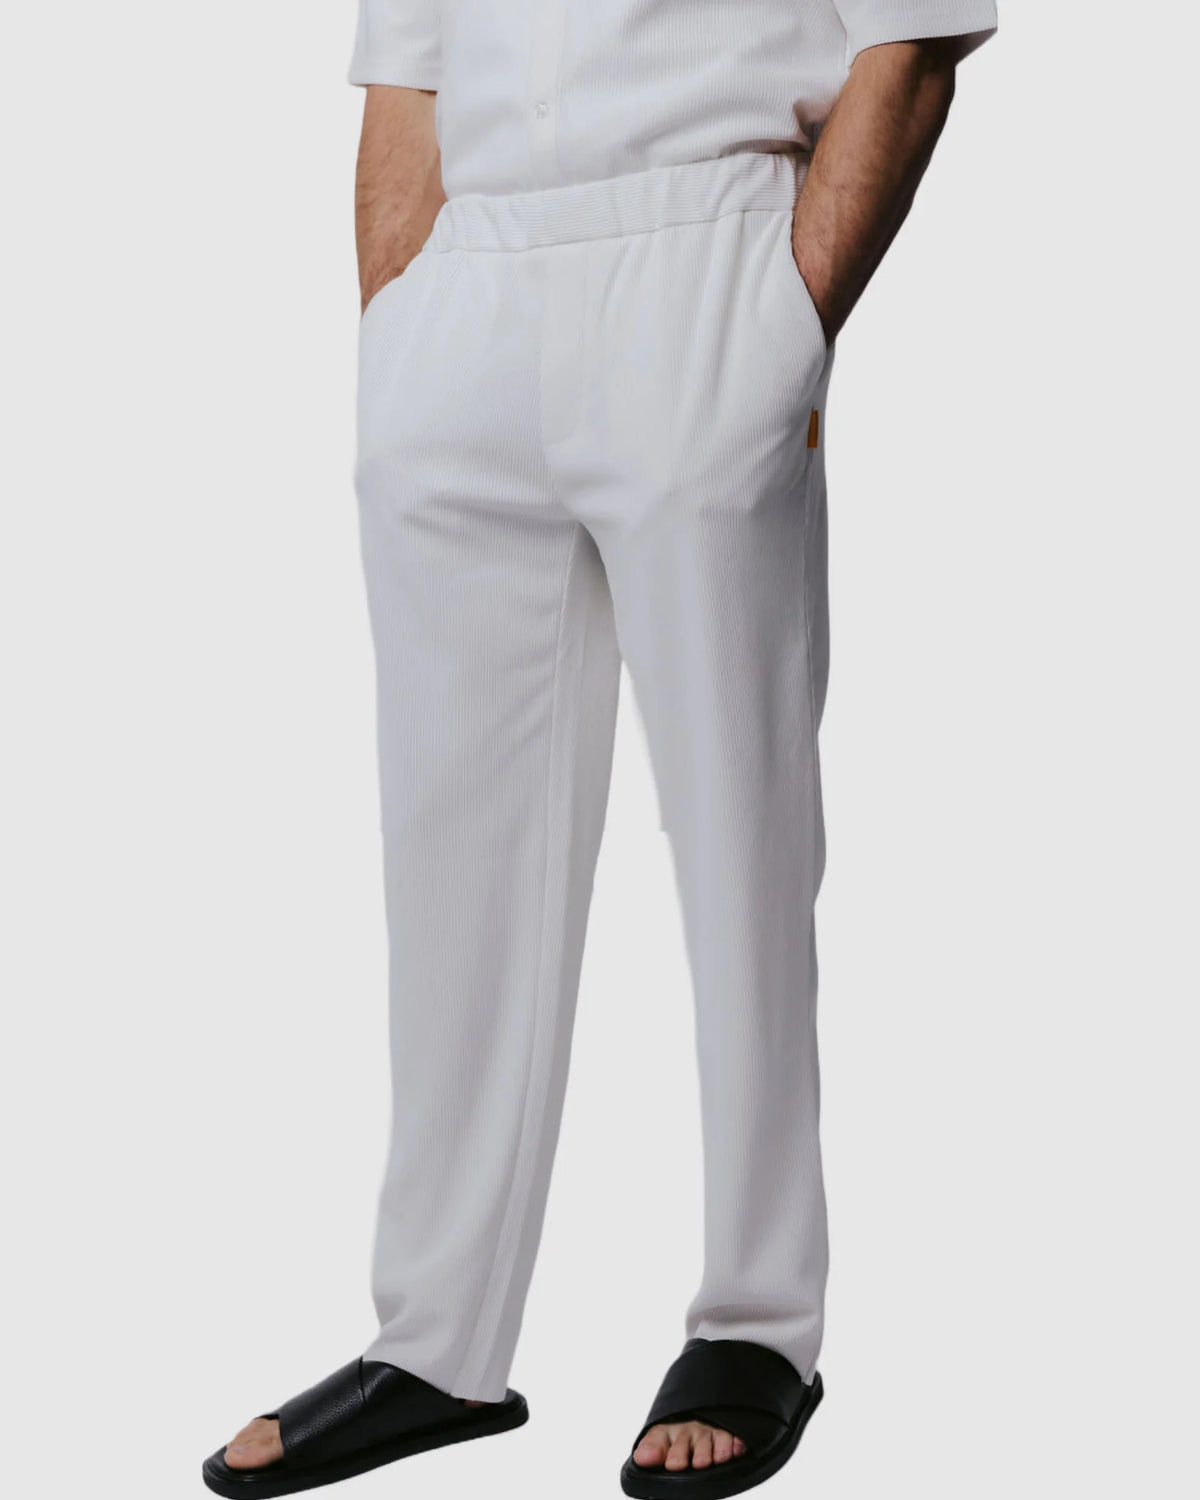 Justin Cassin Abade Pleated Pants in White Color